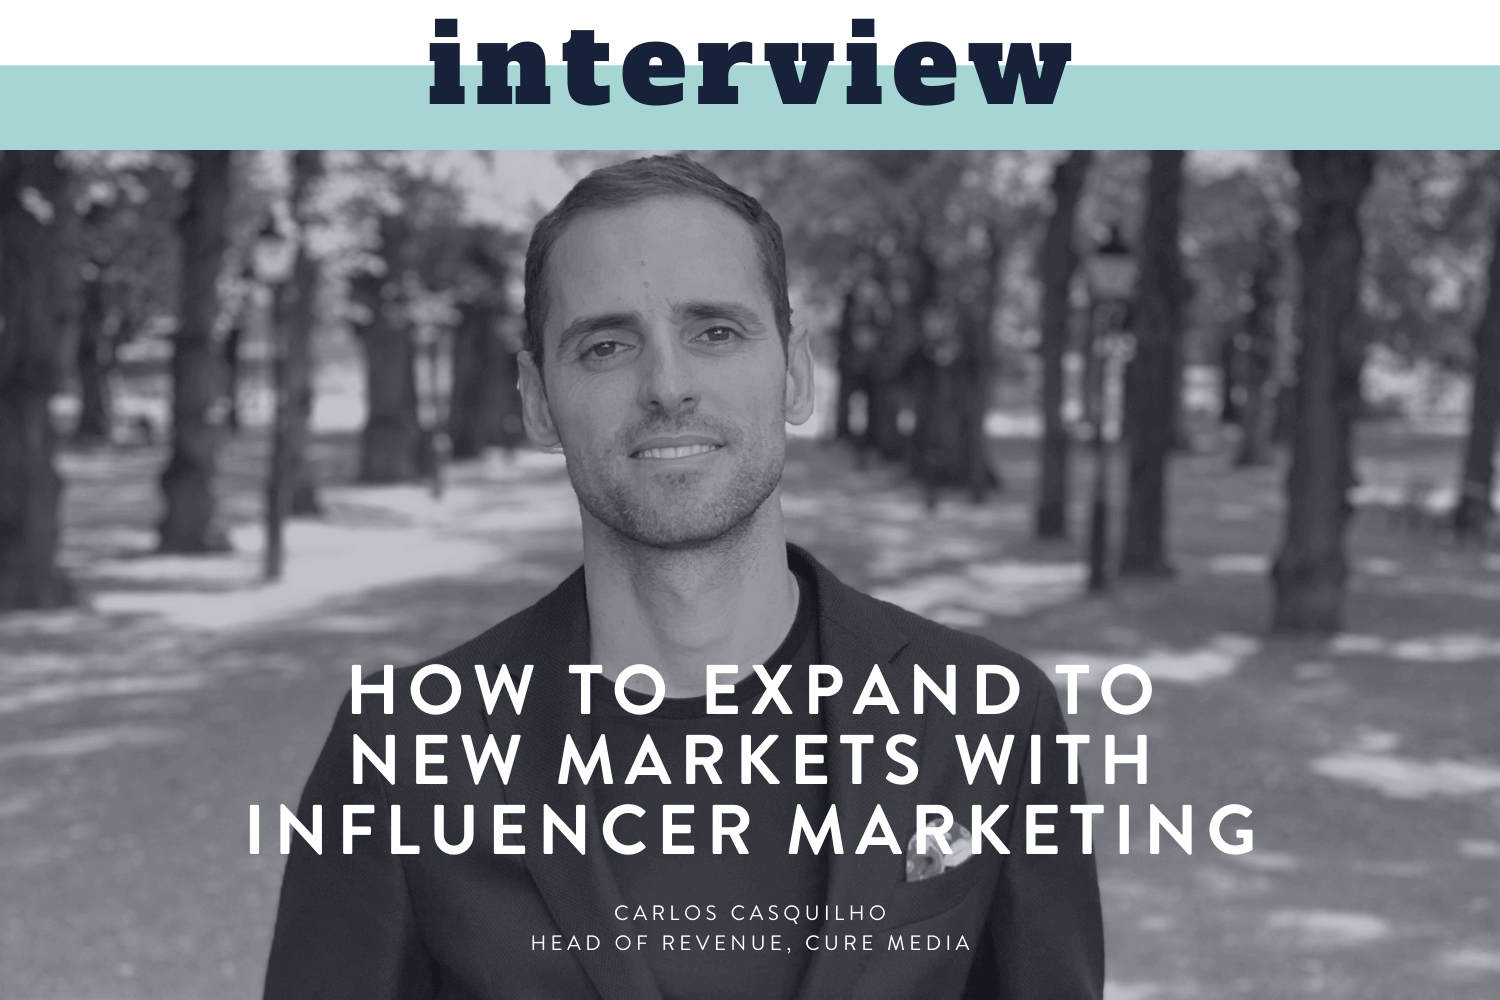 How To Expand To New Markets With Influencer Marketing